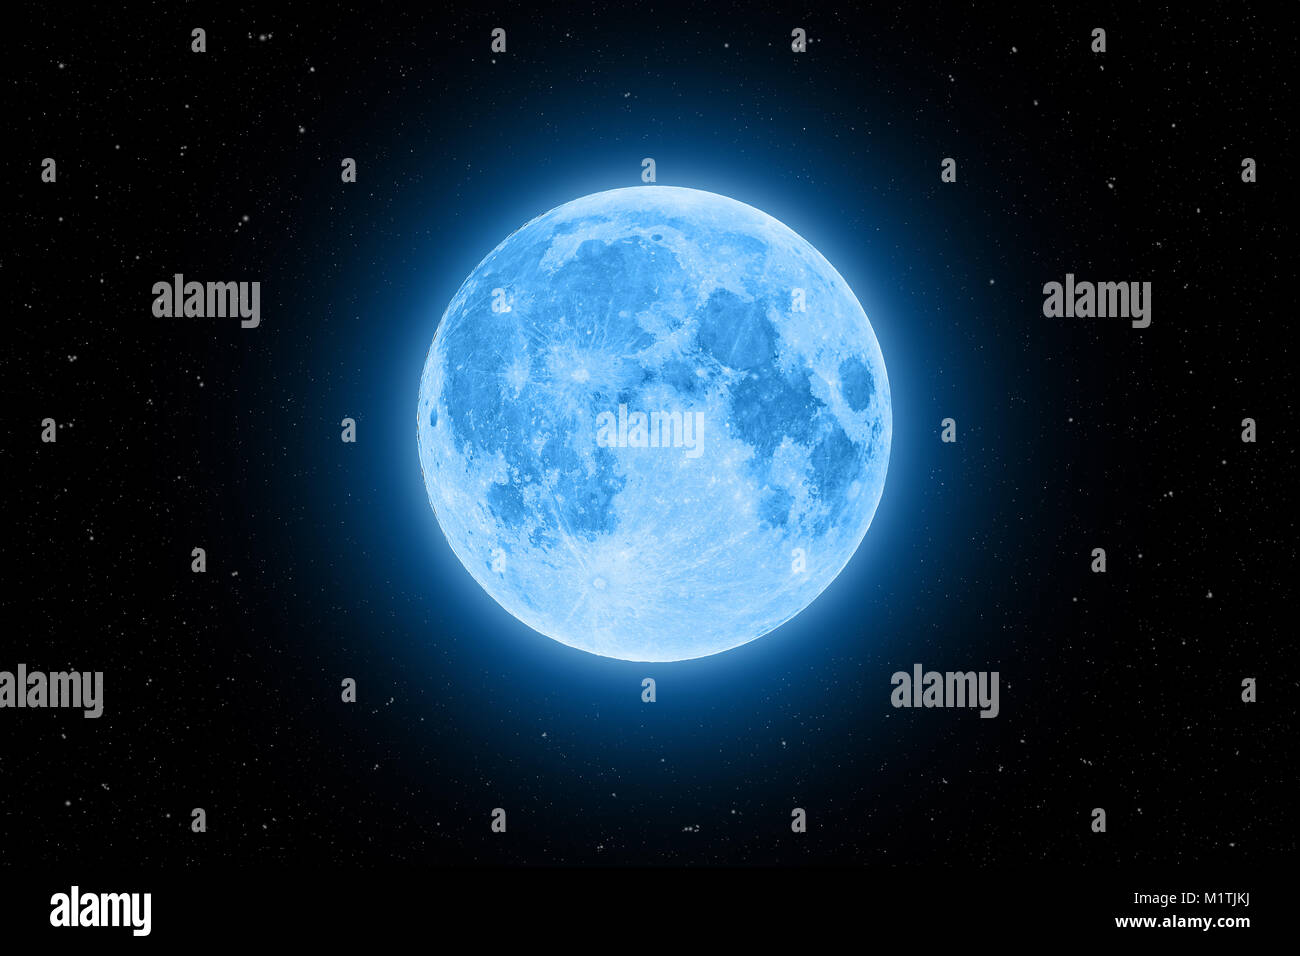 Blue super moon glowing with blue halo surrounded by stars on black sky background Stock Photo